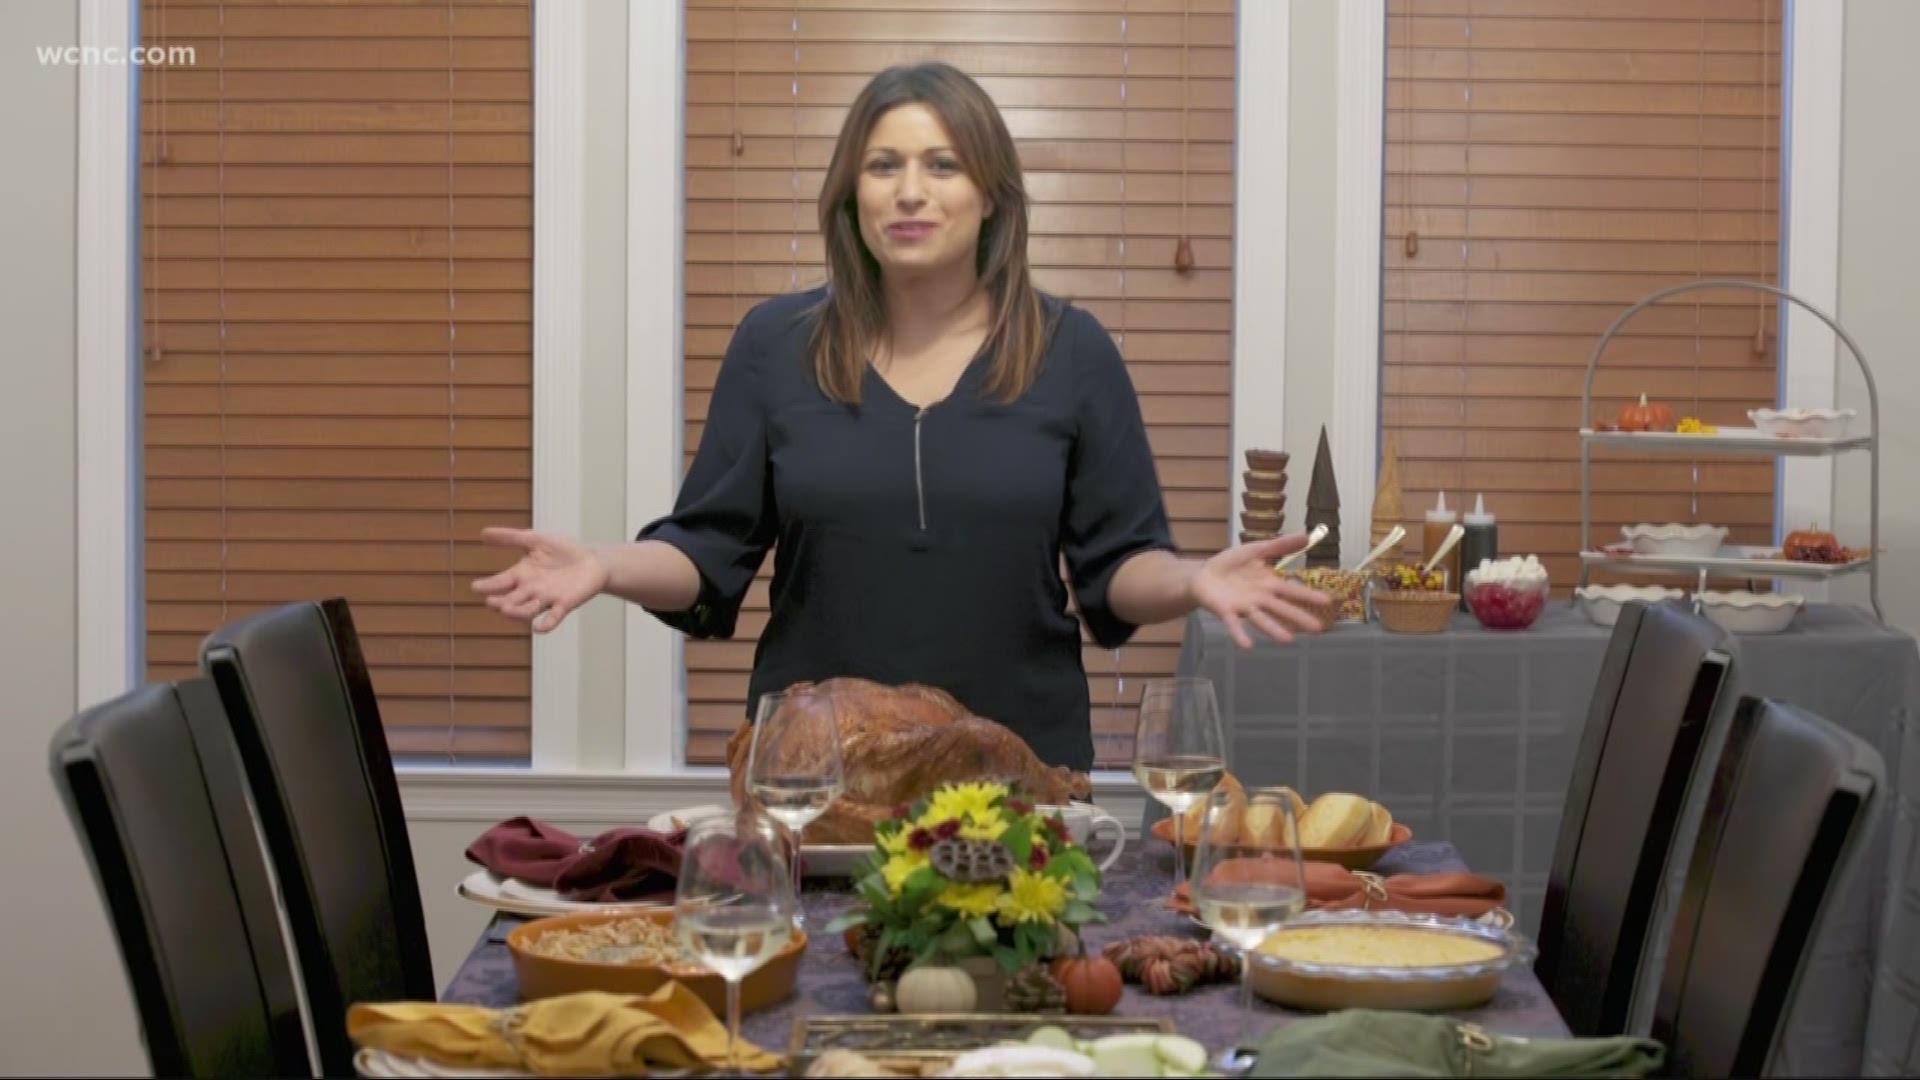 Lifestyle expert Limor Suss has crowd pleasing recipes